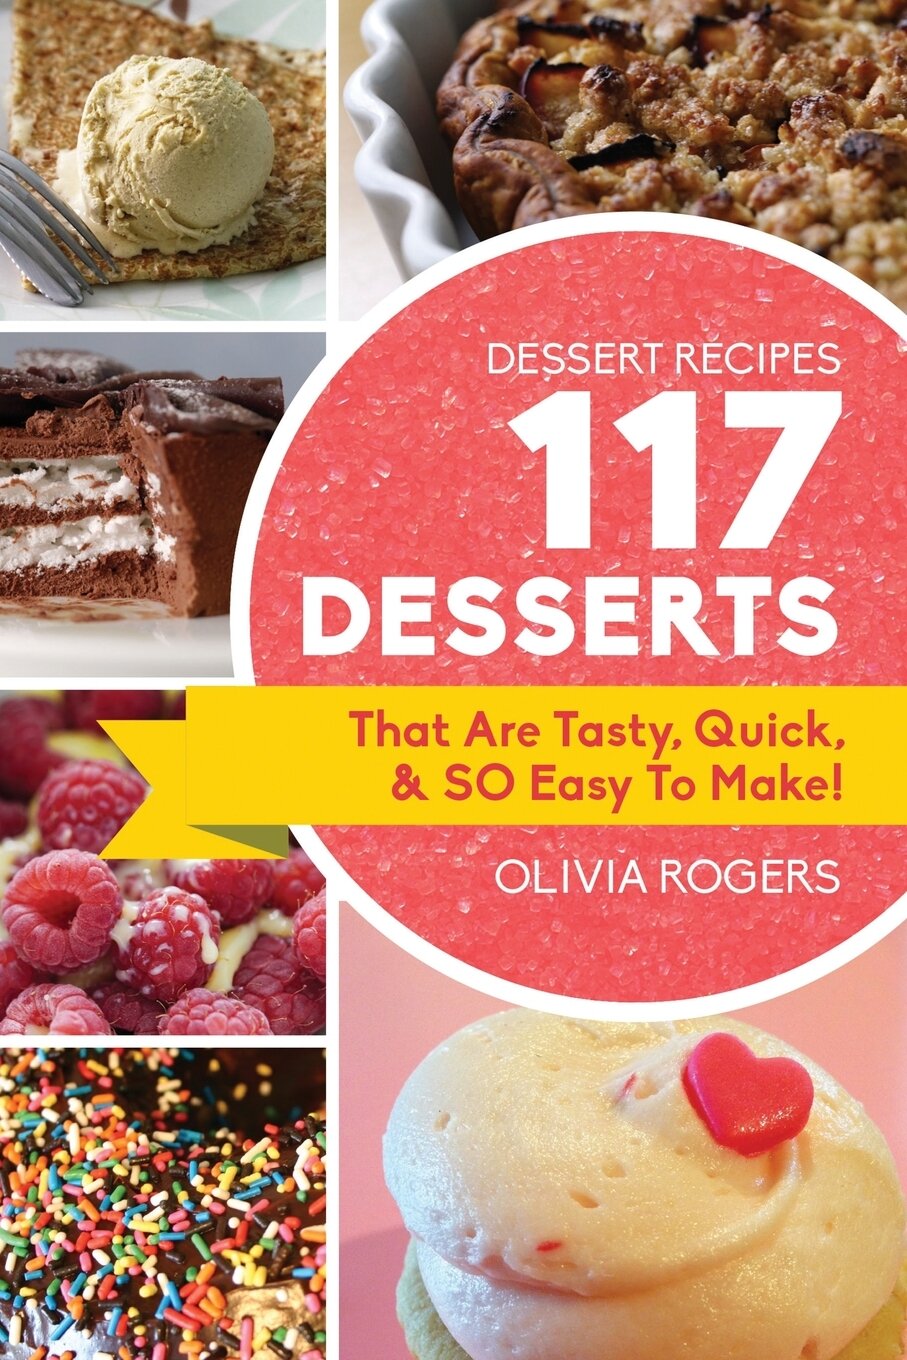 Dessert Recipes. 117 Desserts That Are Tasty Quick & SO Easy to Make!